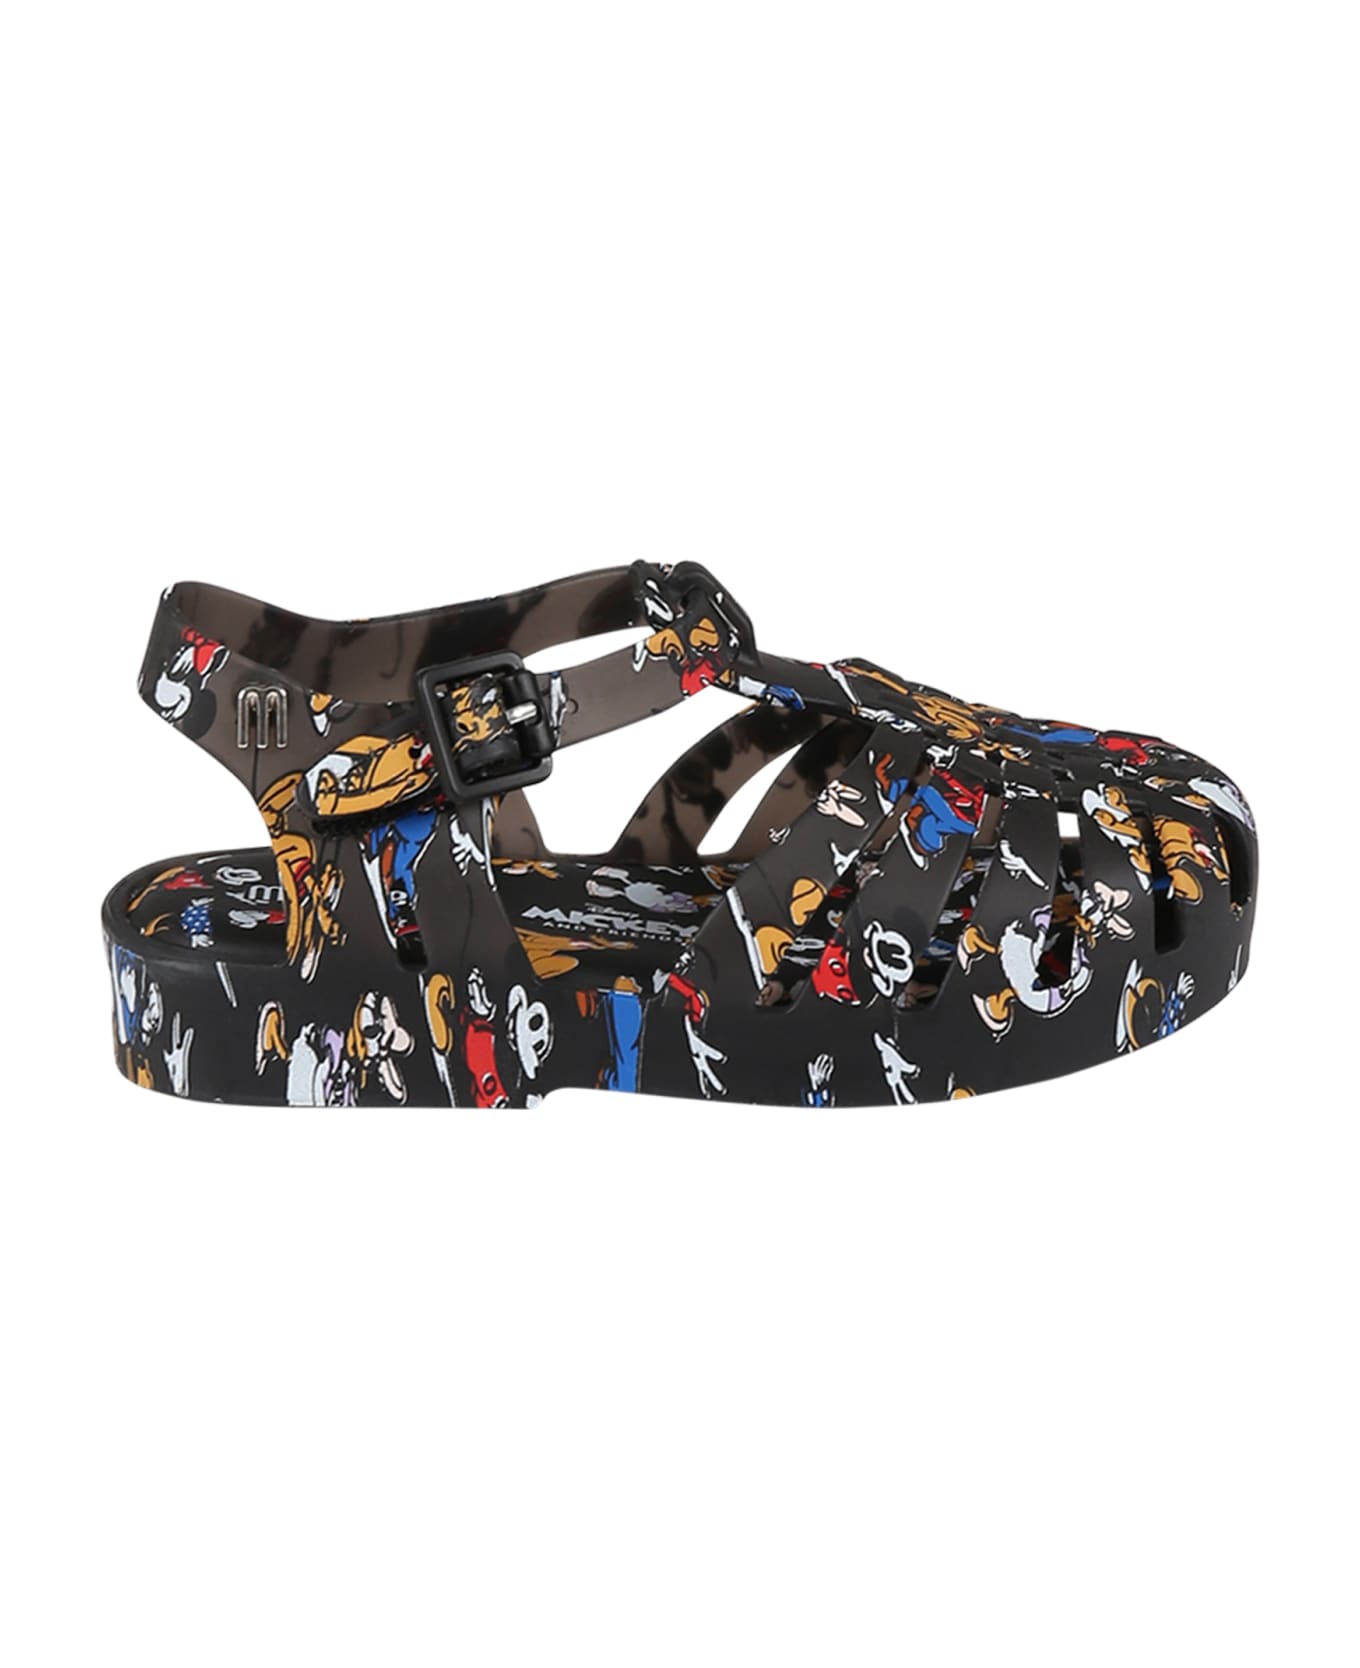 Melissa Black Sandals For Boy With Disney Characters - Black